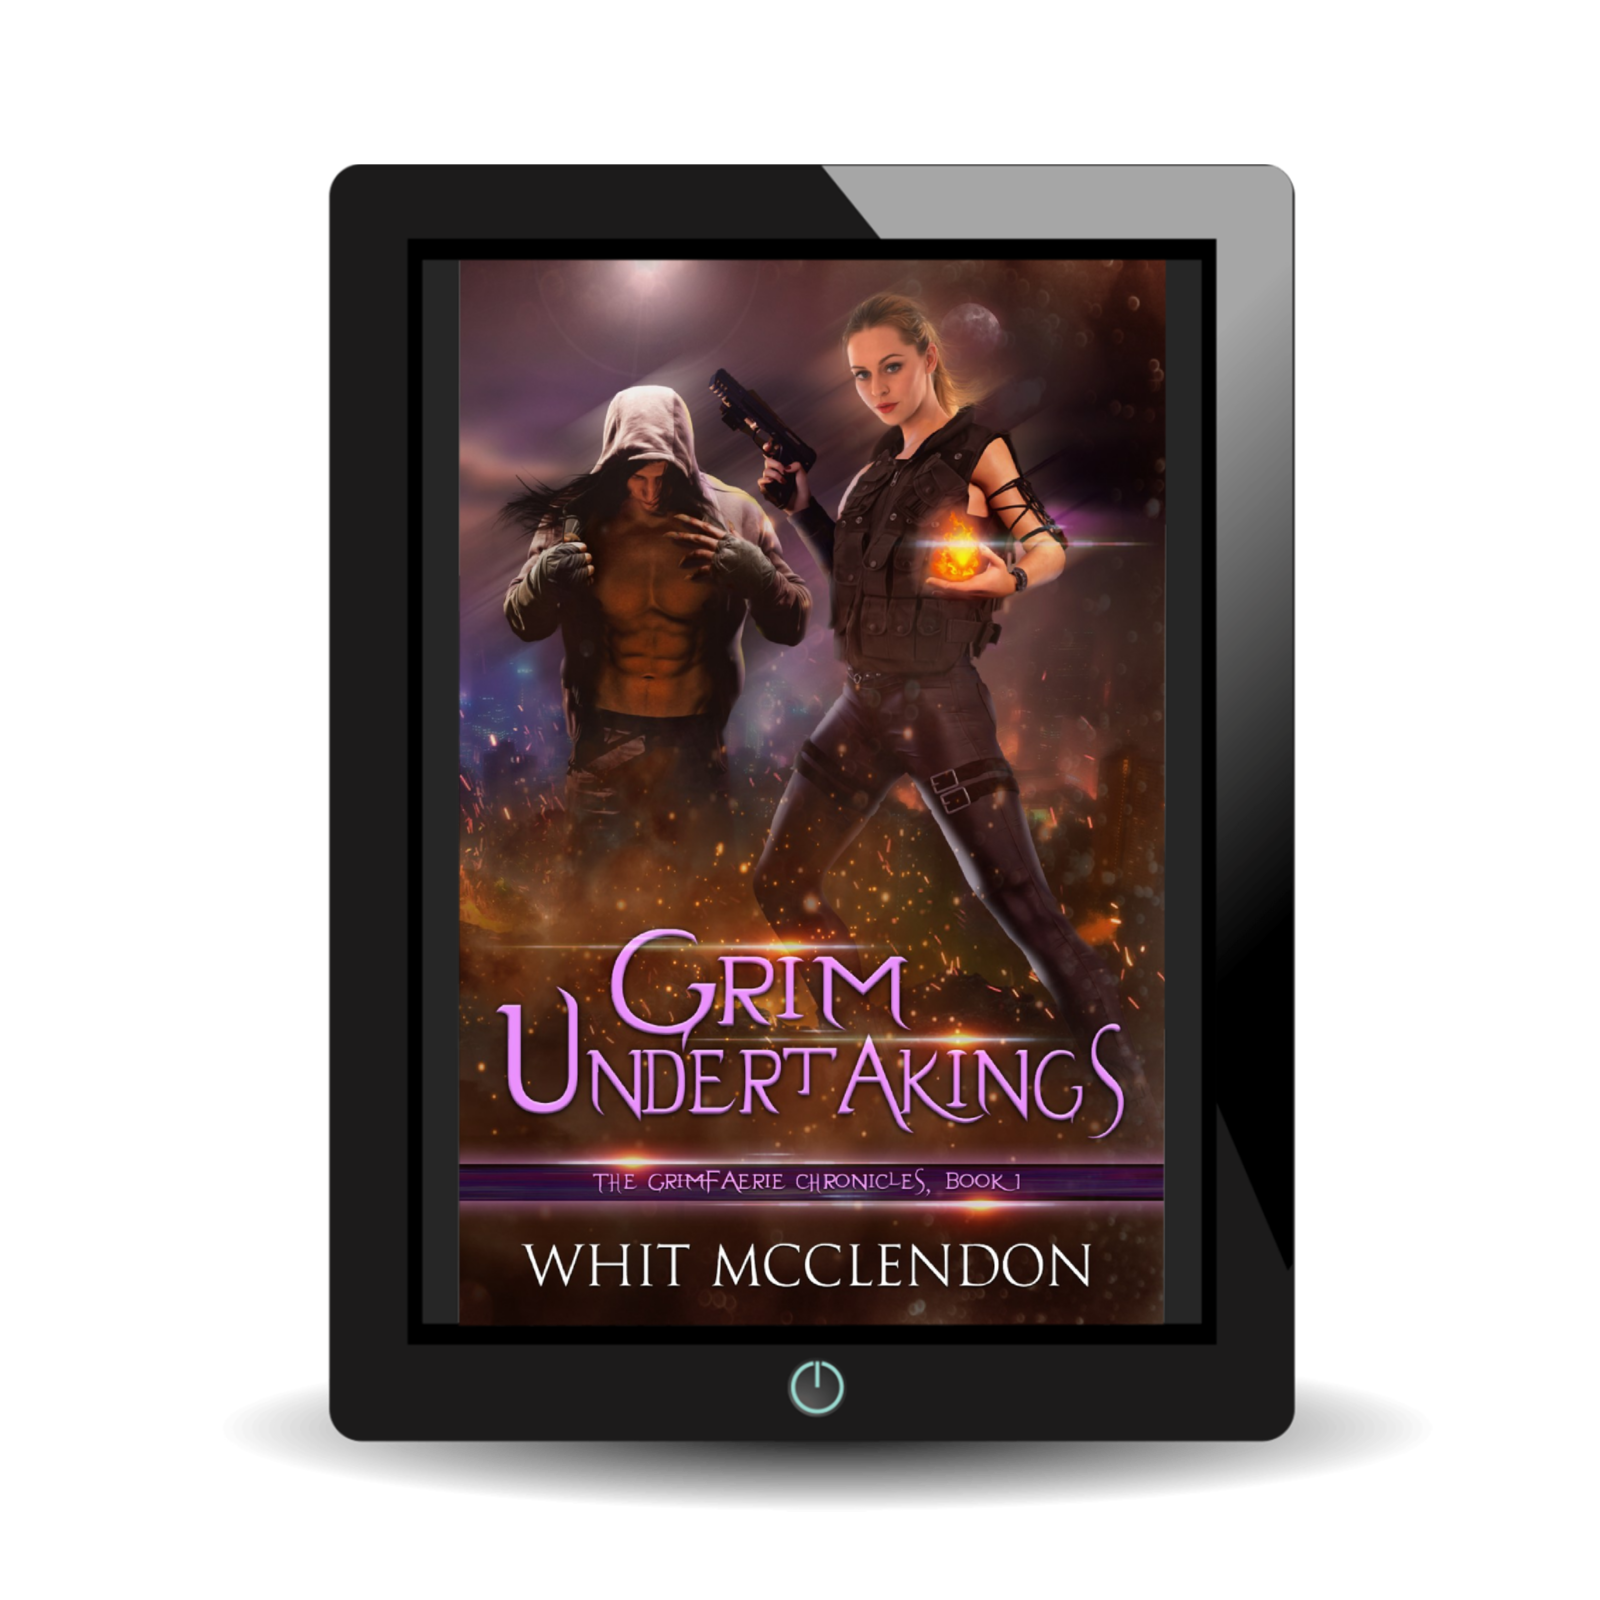 Your FREE COPY of Grim Undertakings: Book 1 of the GrimFaerie Chronicles-EBOOK